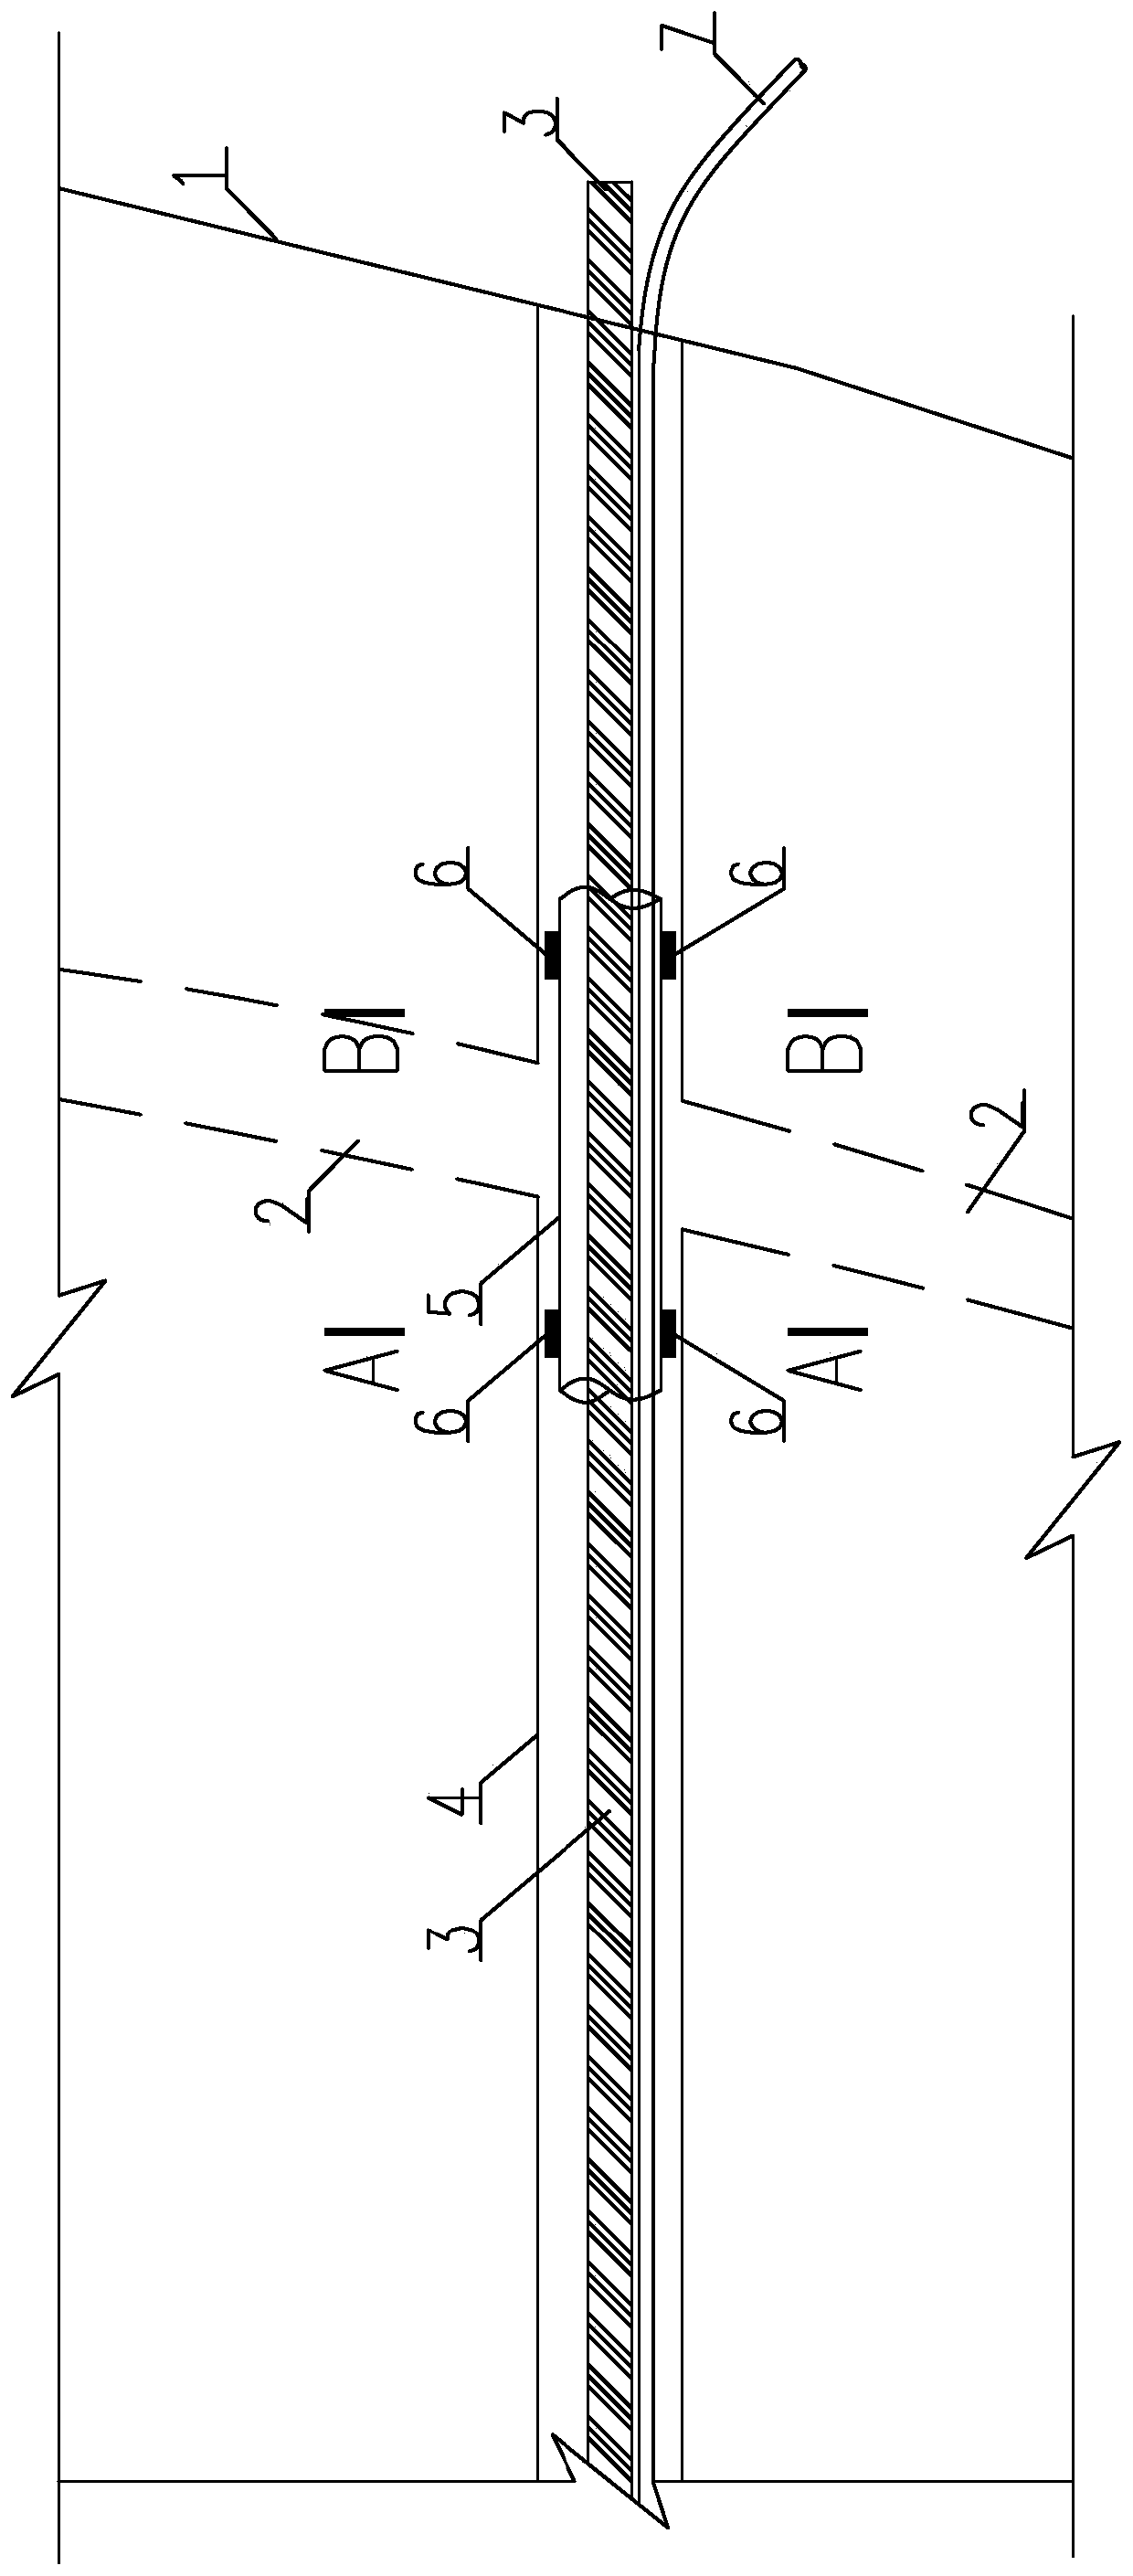 Supporting structure and plugging sleeve structure for anchor rod gap grouting